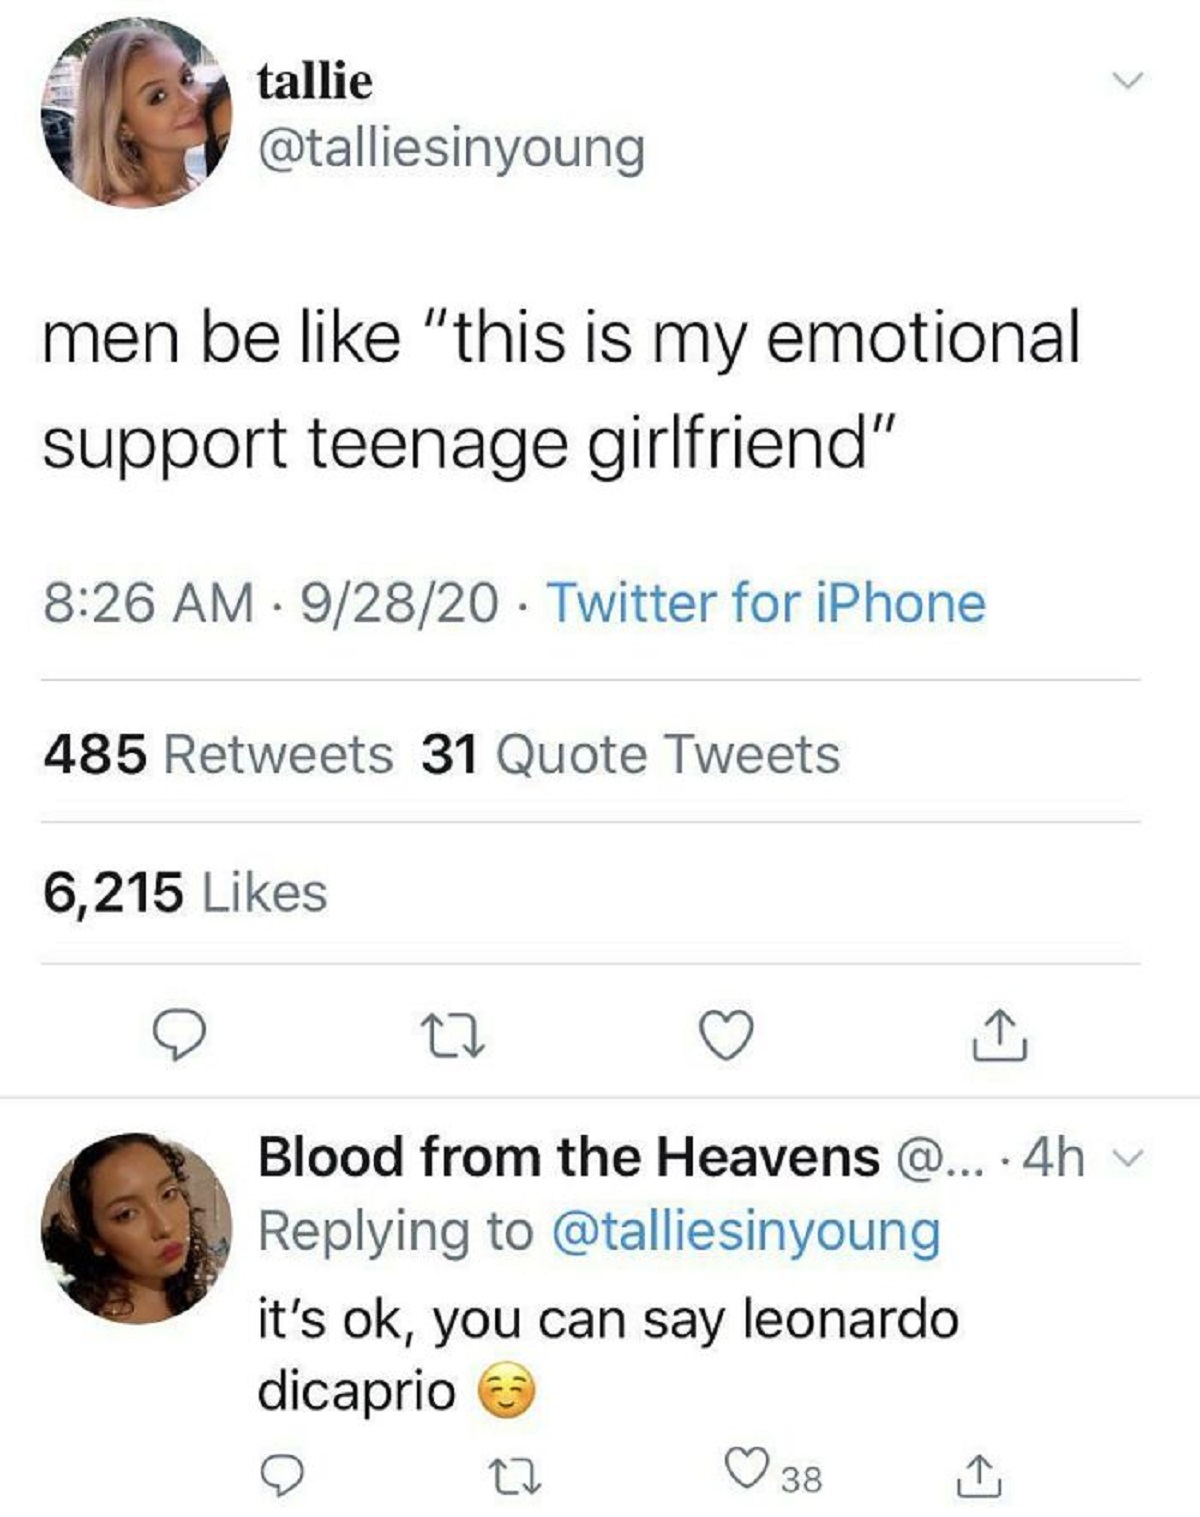 funny replies better than the original - smile - tallie men be "this is my emotional support teenage girlfriend" 92820 Twitter for iPhone . 485 31 Quote Tweets 6,215 27 Blood from the Heavens @... .4h it's ok, you can say leonardo dicaprio 22 38